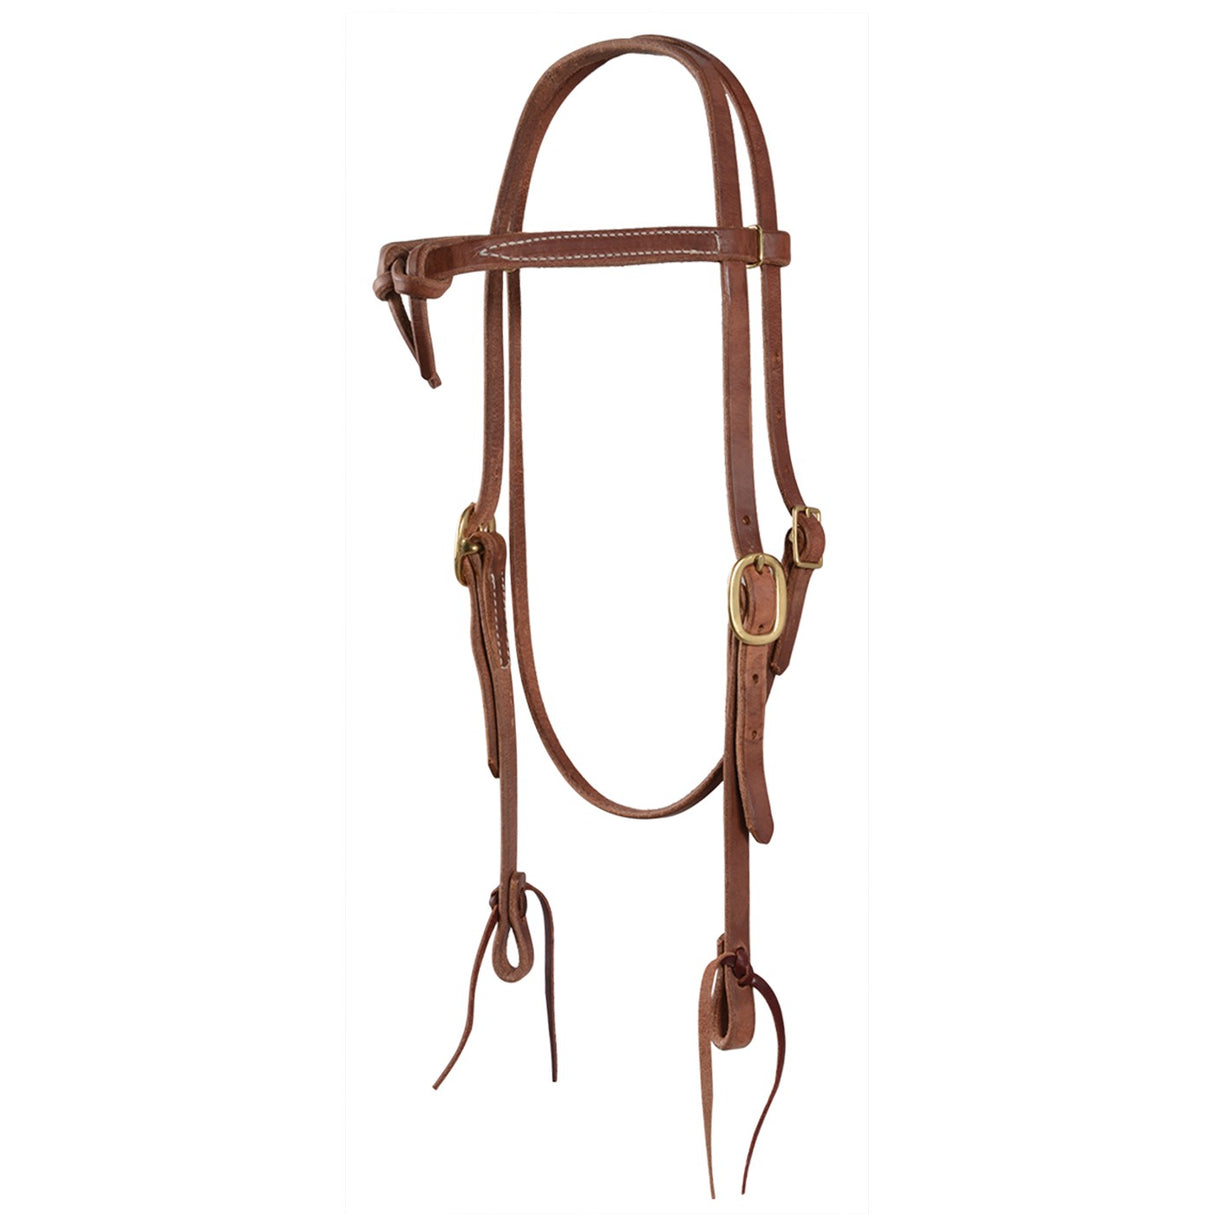 Copper Canyon Harness Leather Futurity Knot Headstall W/ Ties